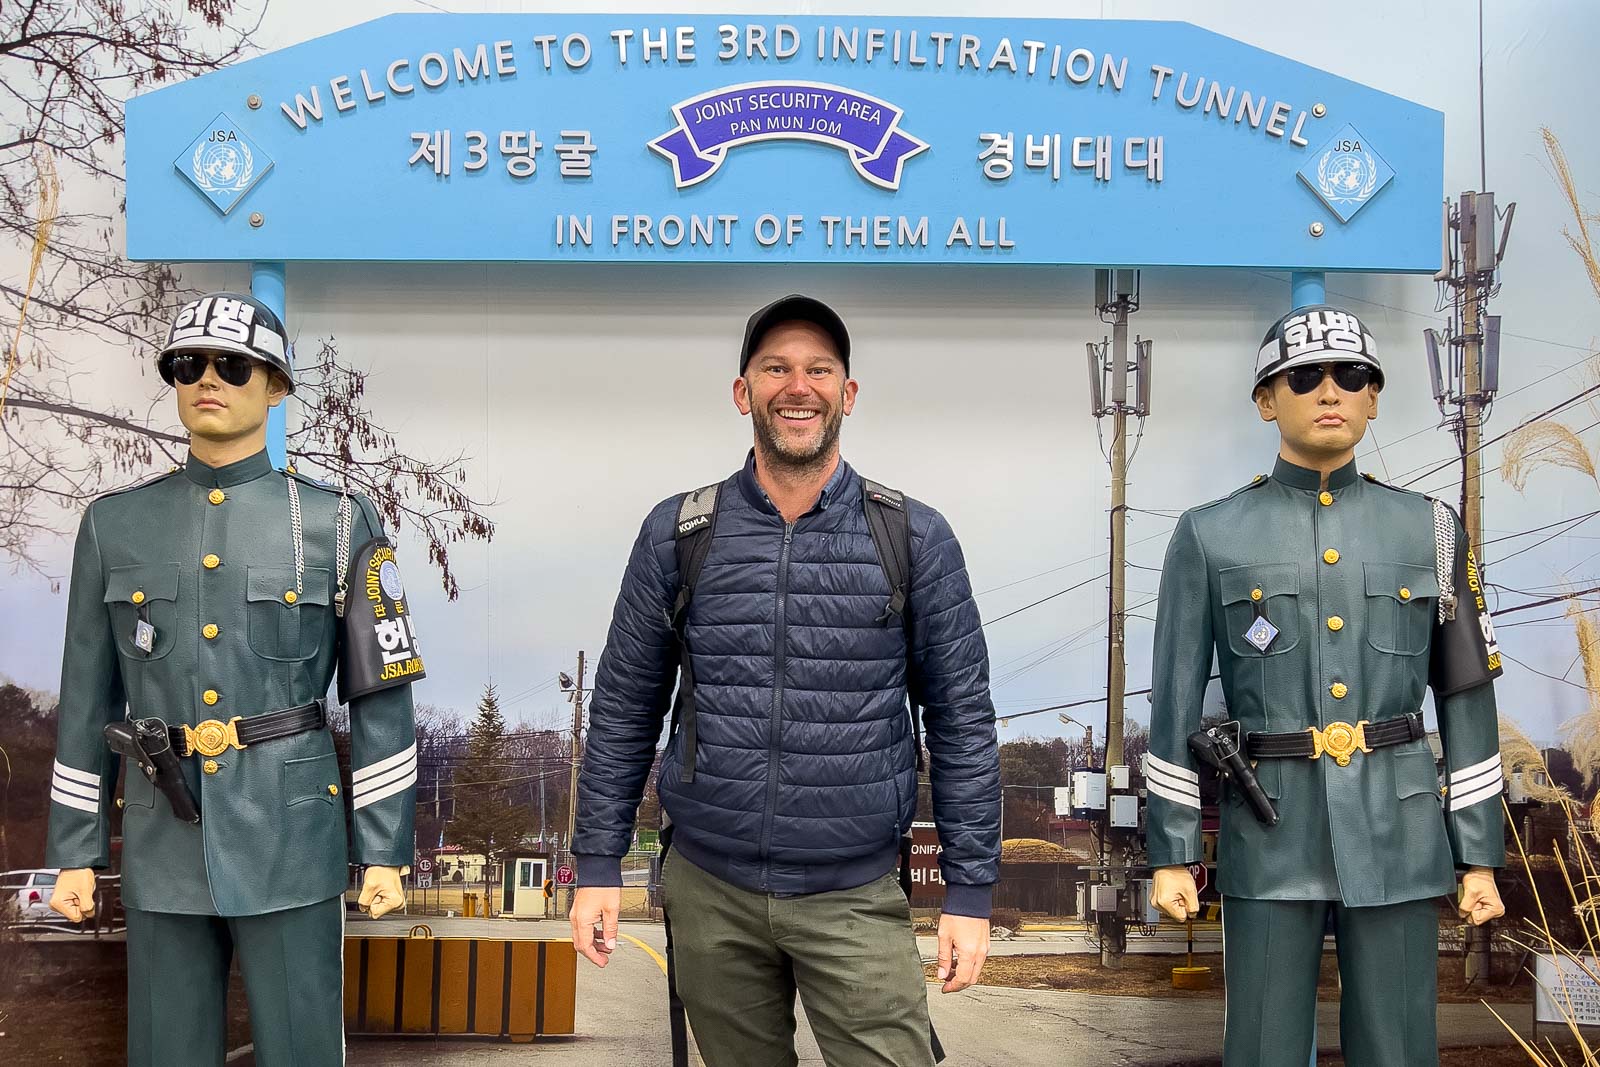 Visiting the DMZ from Seoul